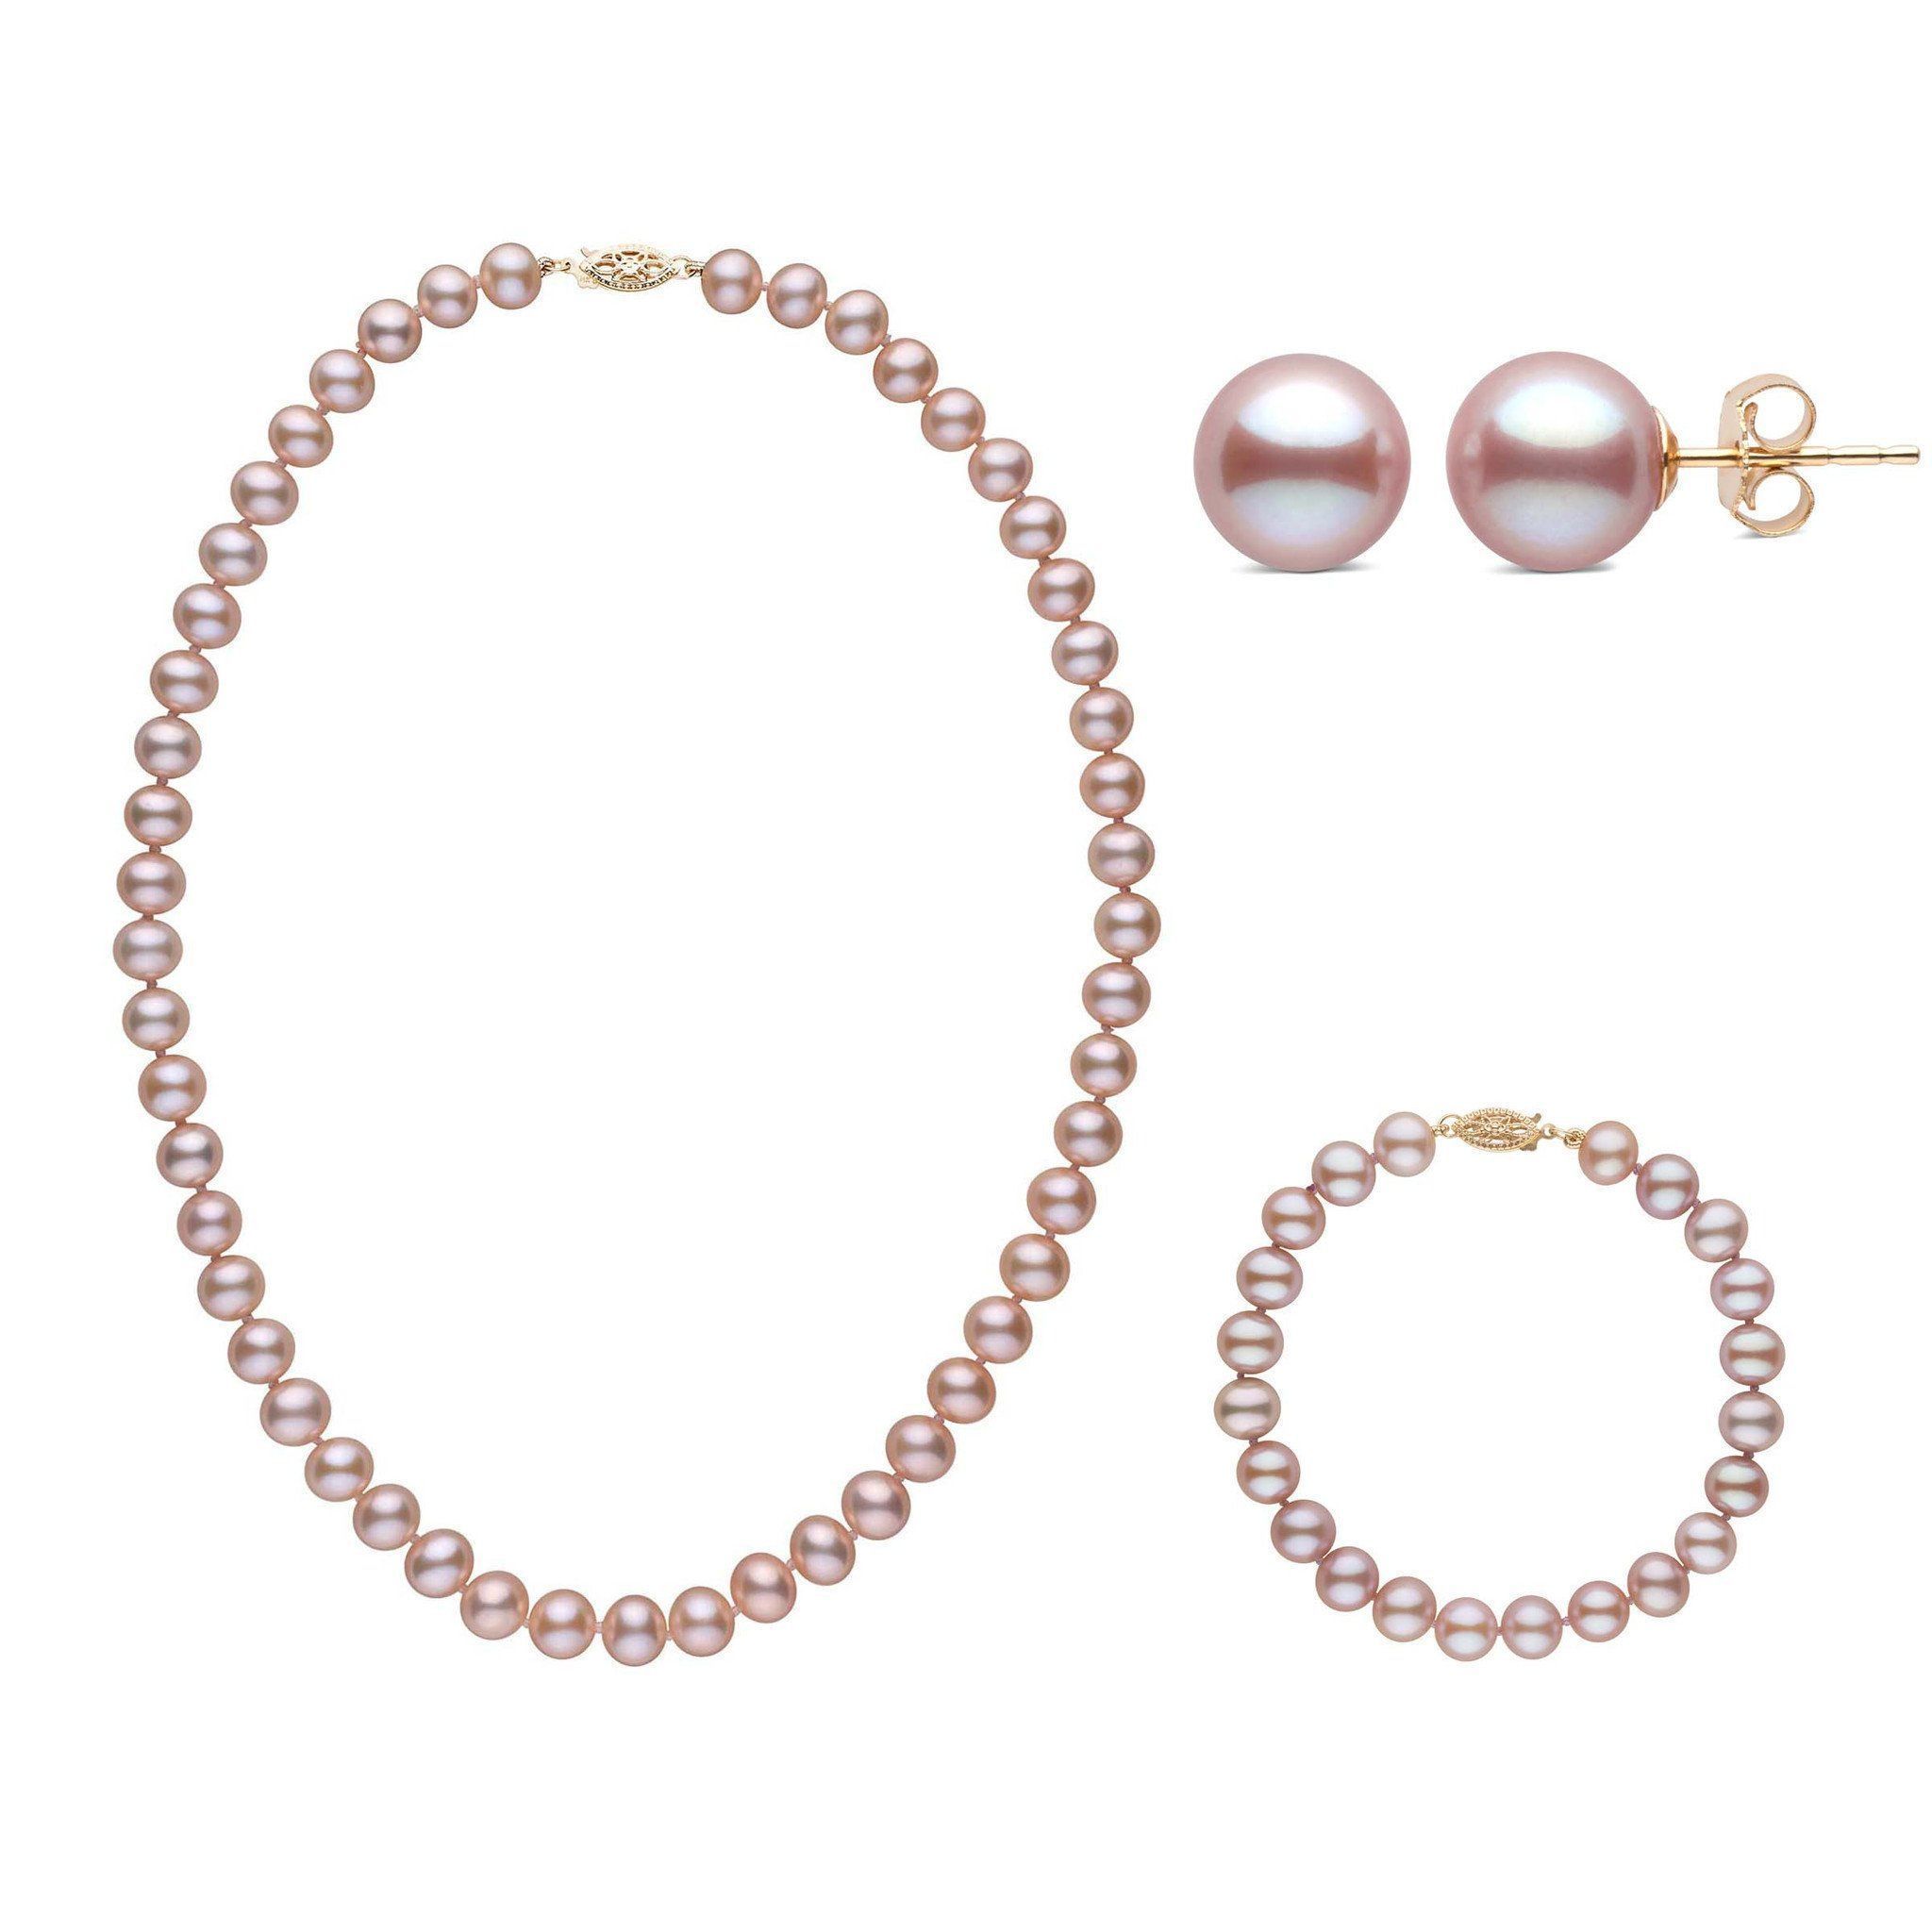 16 Inch 3 Piece Set of 7.5-8.0 mm AA+ Lavender Freshwater Pearls yellow gold